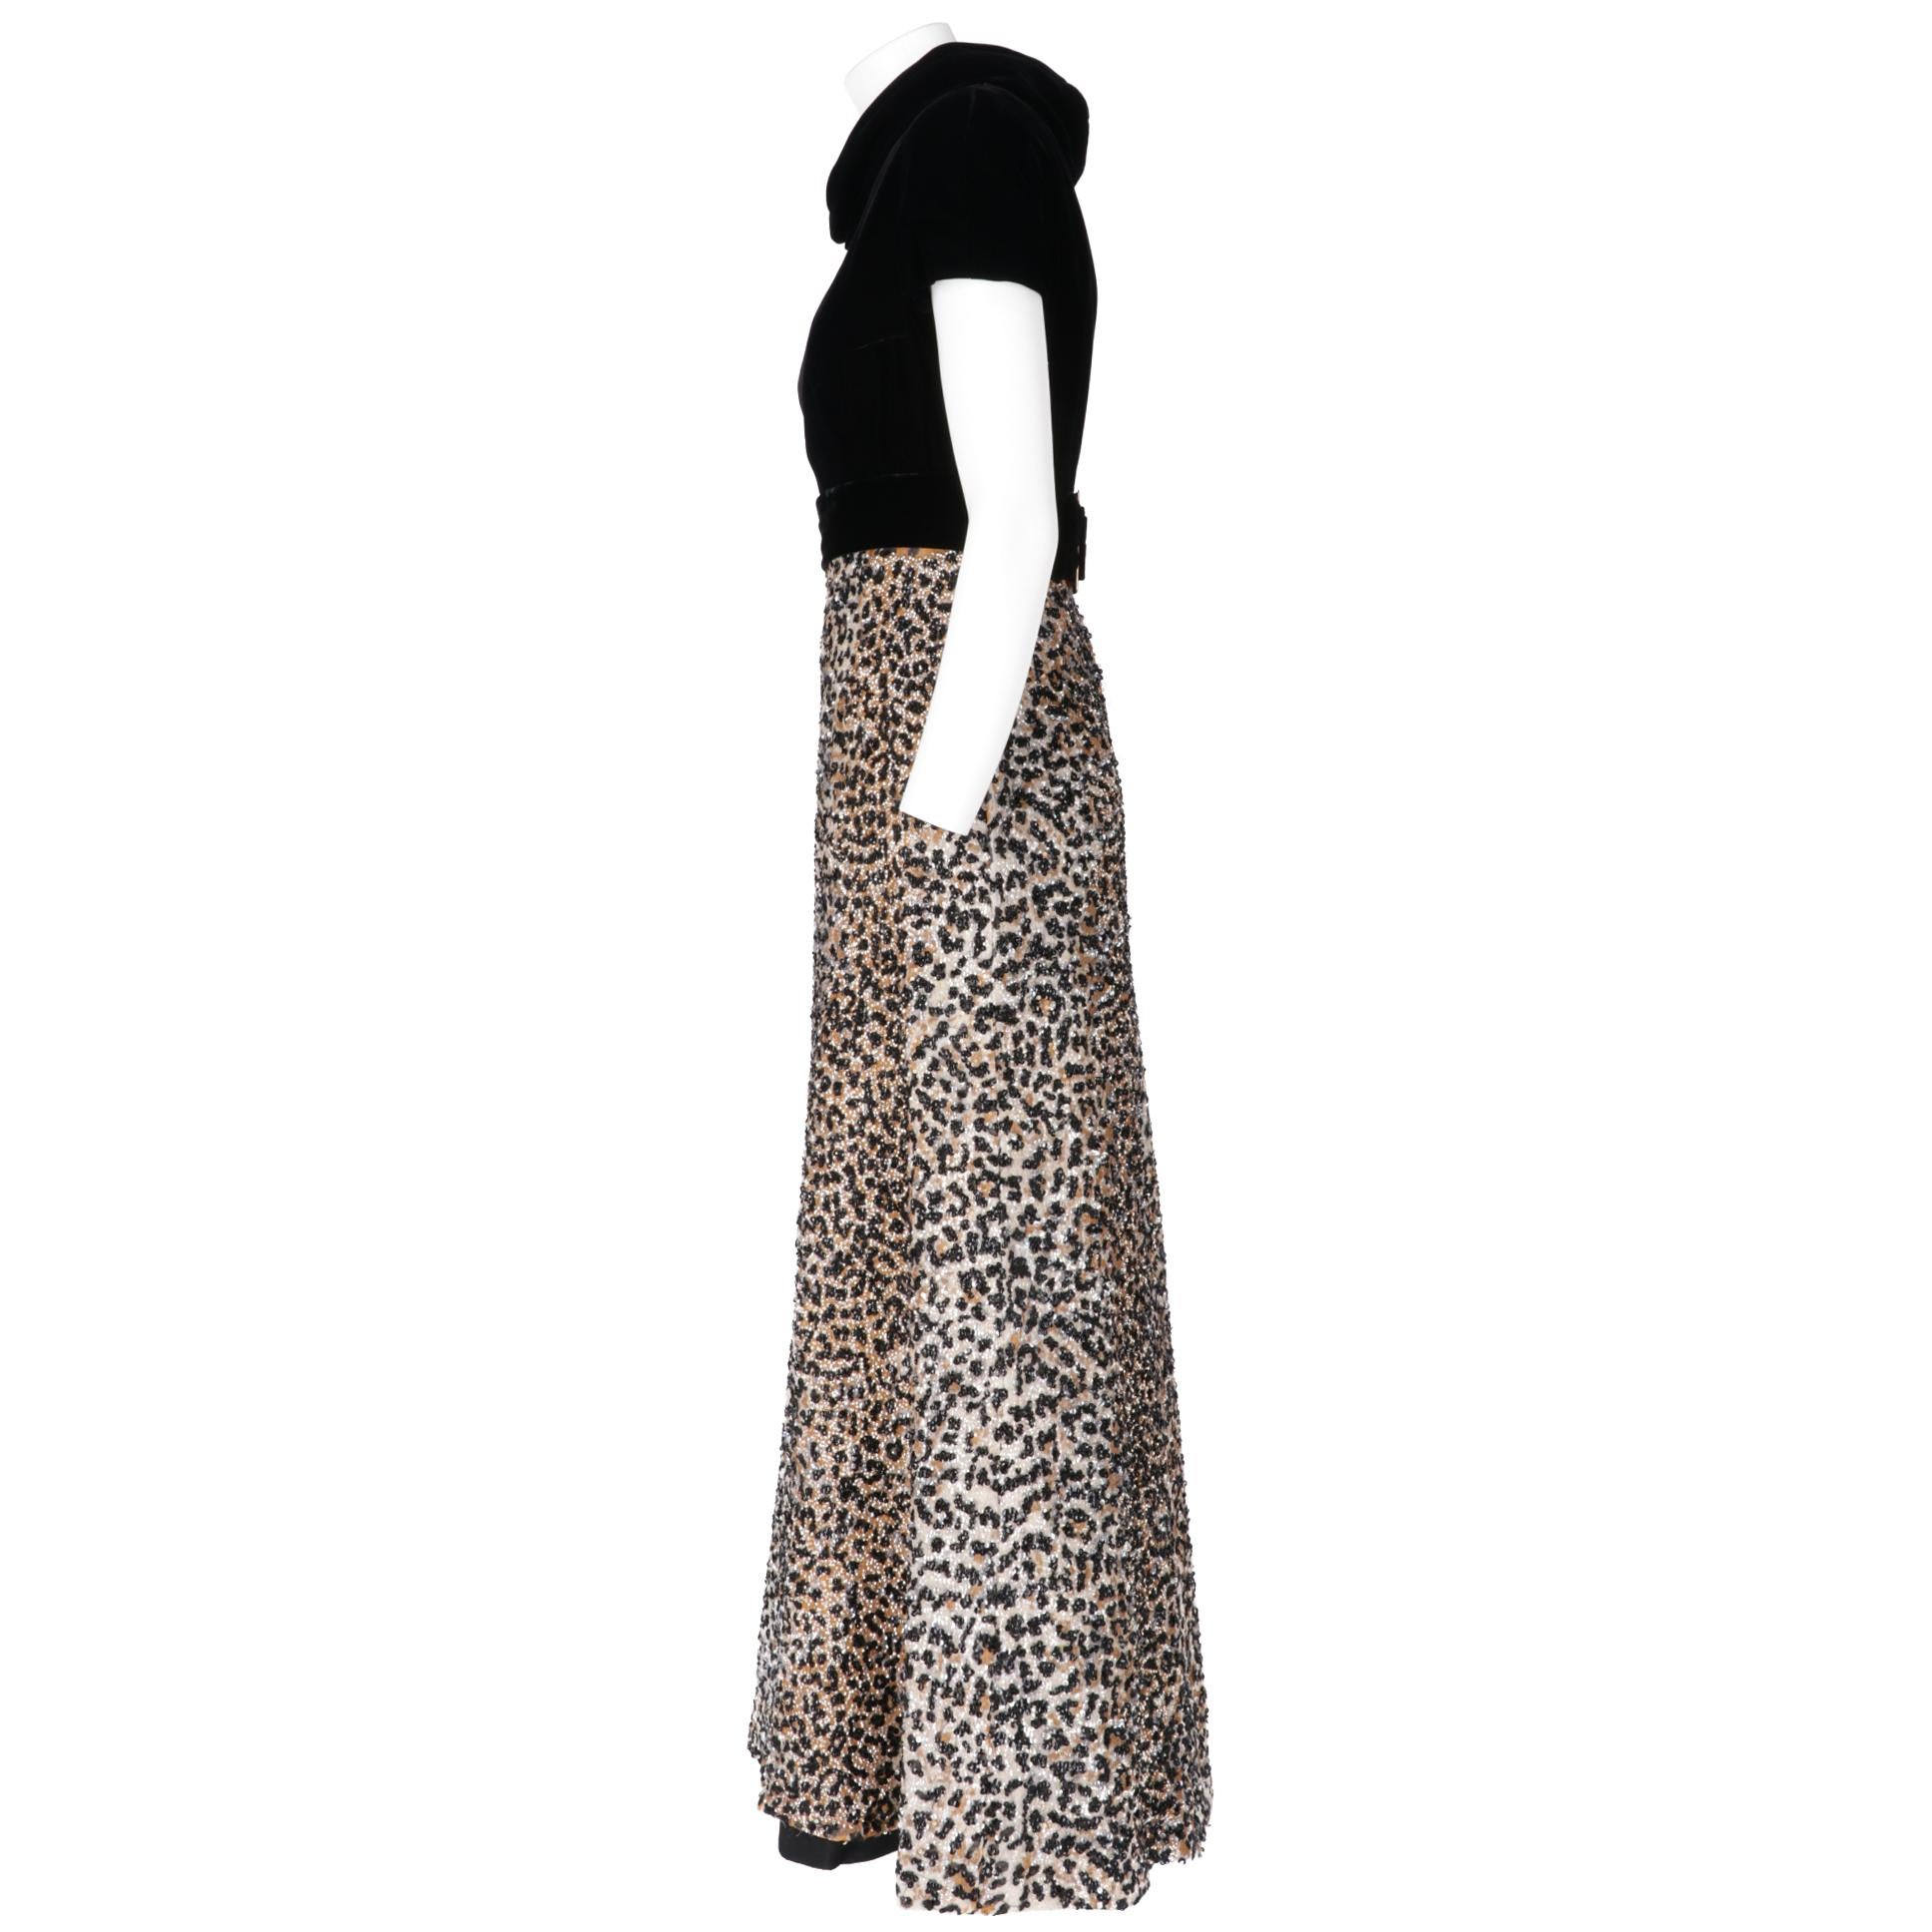 Pirovano long dress with silk fabric skirt with leopard print and black and white sequins applications and black velvet top, teardrop neck and back closure with zip and belt with golden metal buckle. Lined interior.

The product has the defective